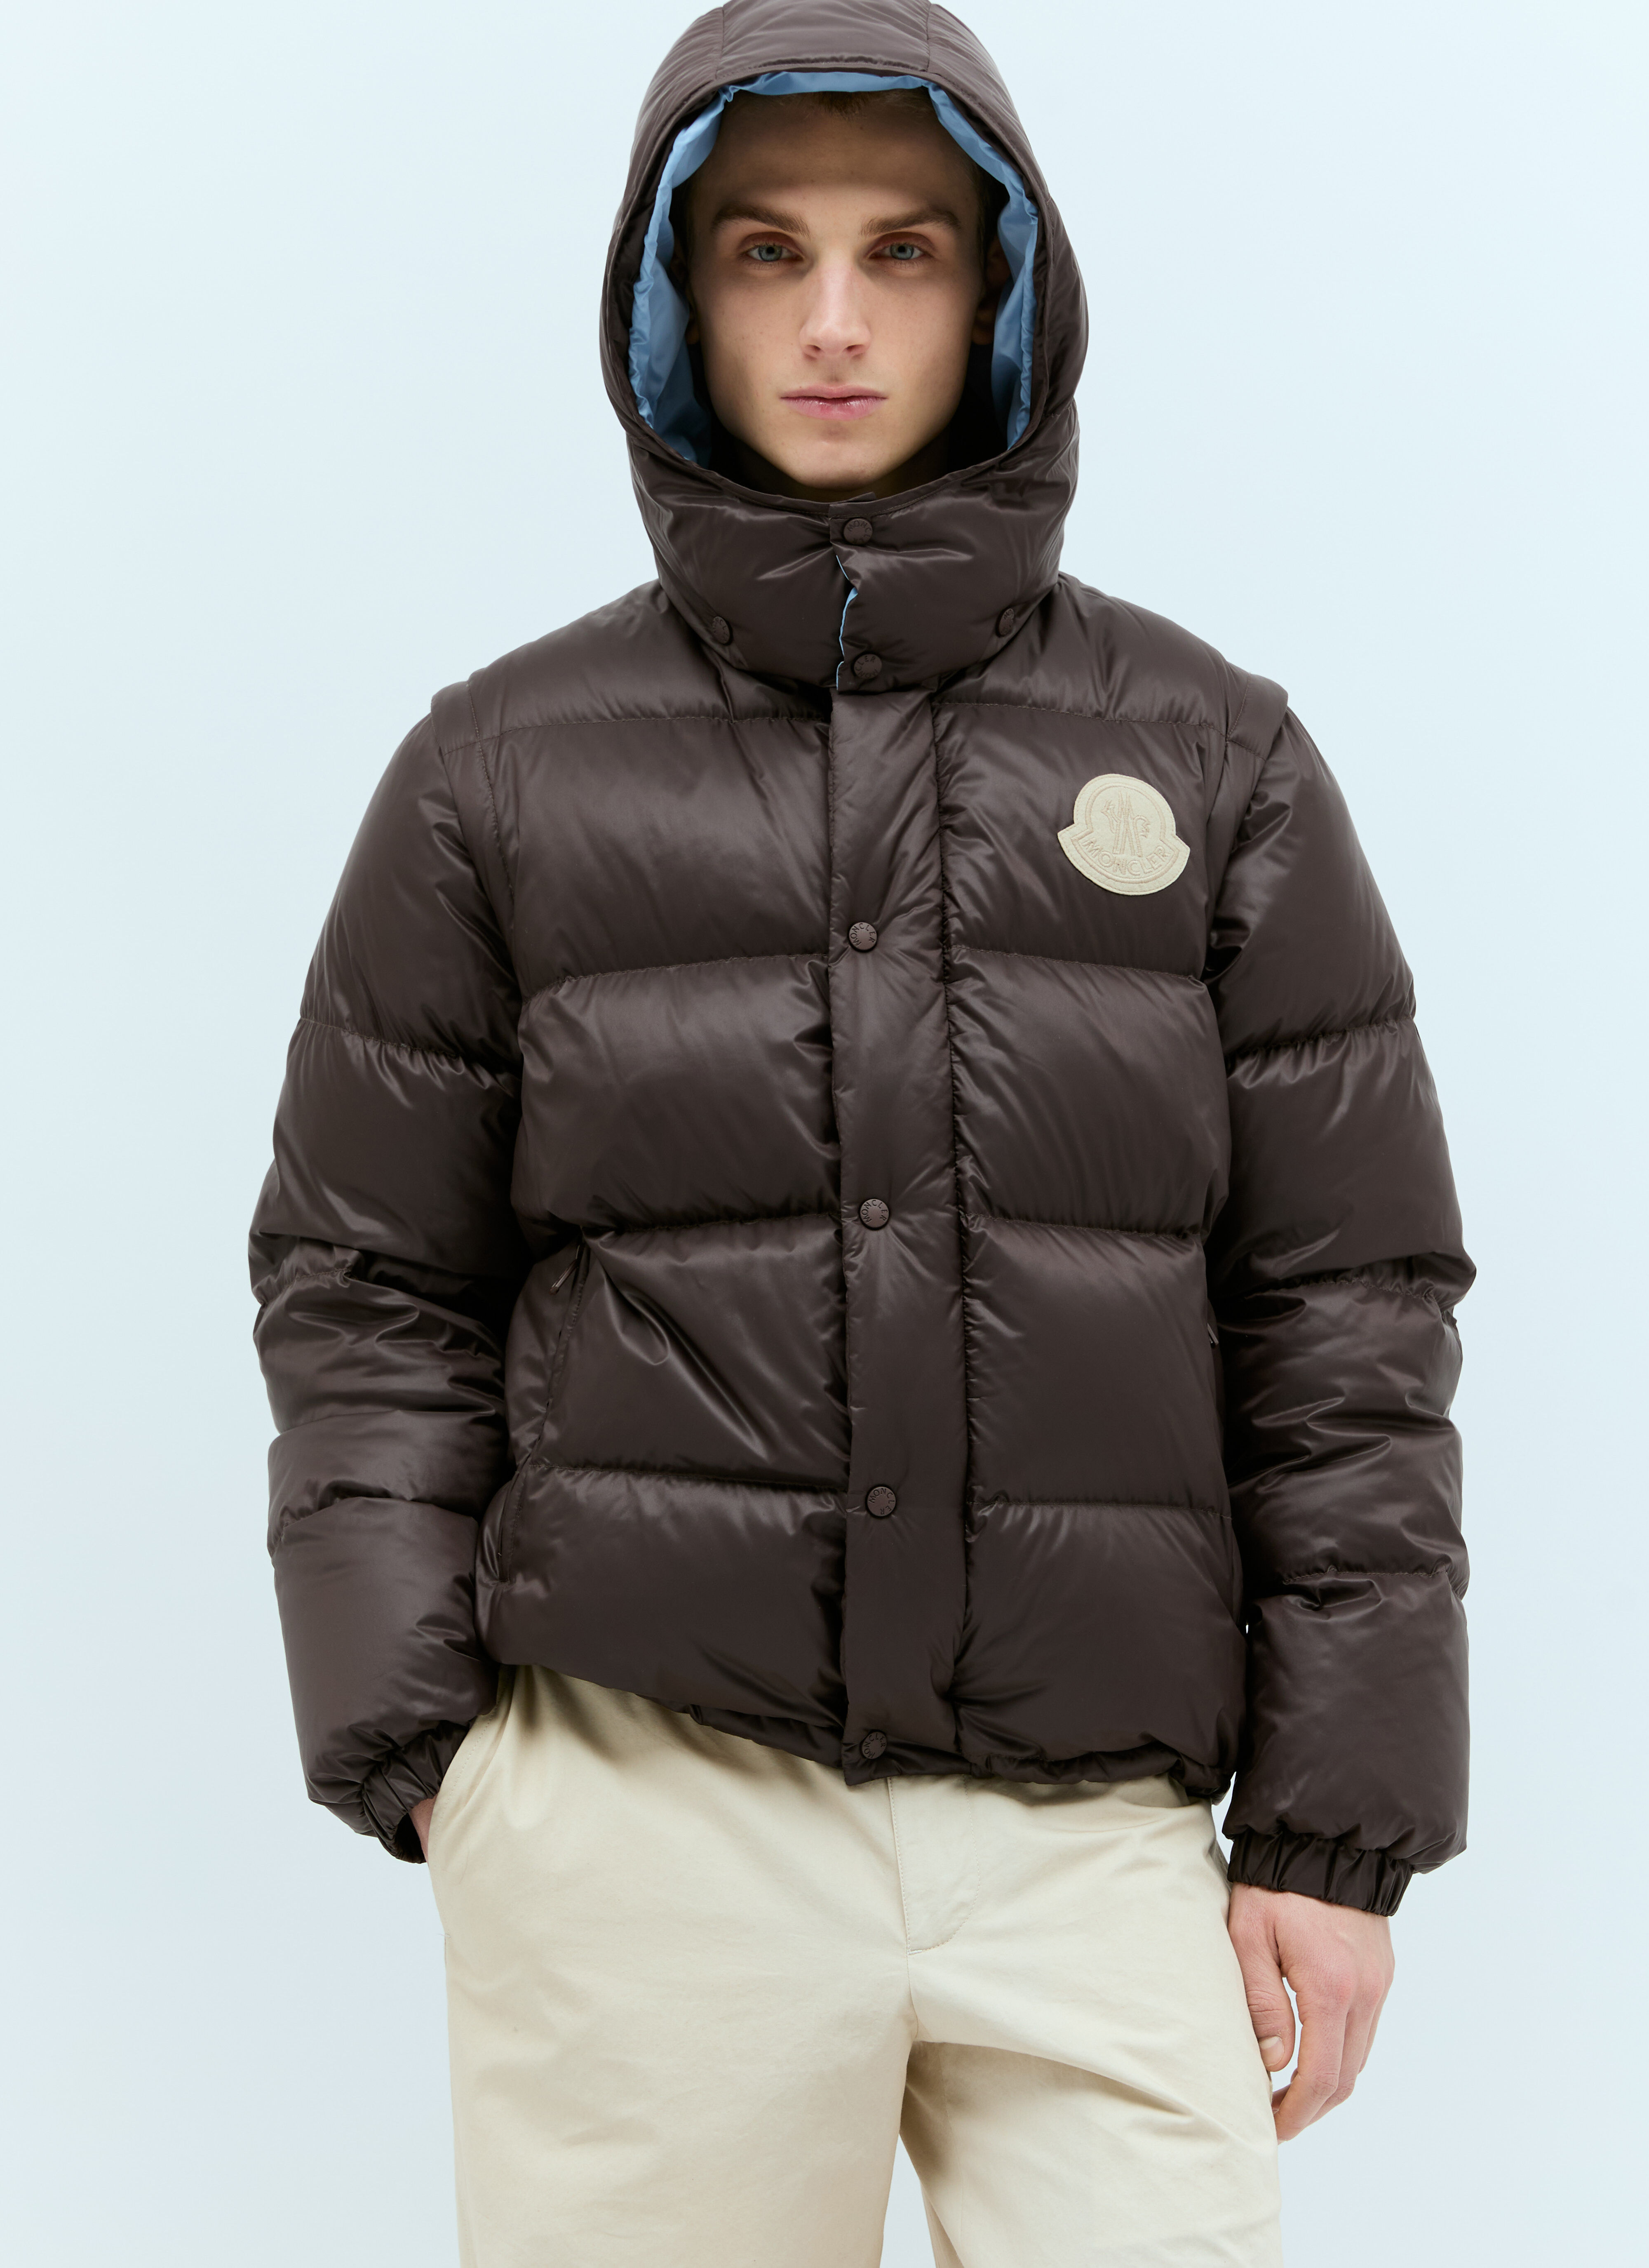 Moncler x Roc Nation designed by Jay-Z Cyclone 2-In-1 Down Jacket Beige mrn0156001